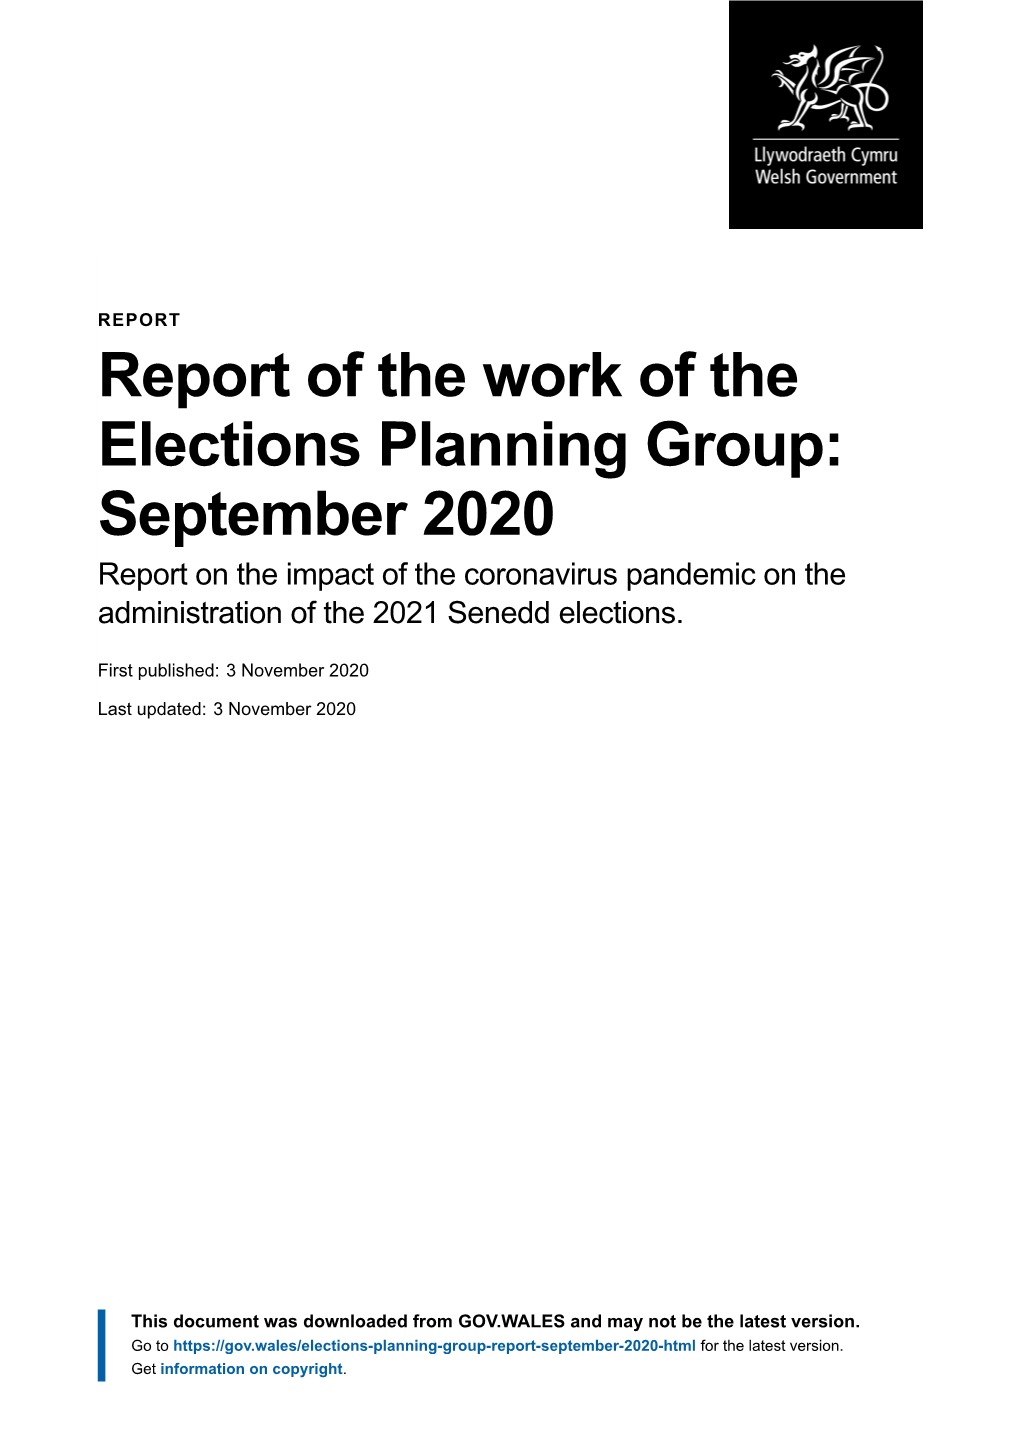 Report of the Work of the Elections Planning Group: September 2020 Report on the Impact of the Coronavirus Pandemic on the Administration of the 2021 Senedd Elections